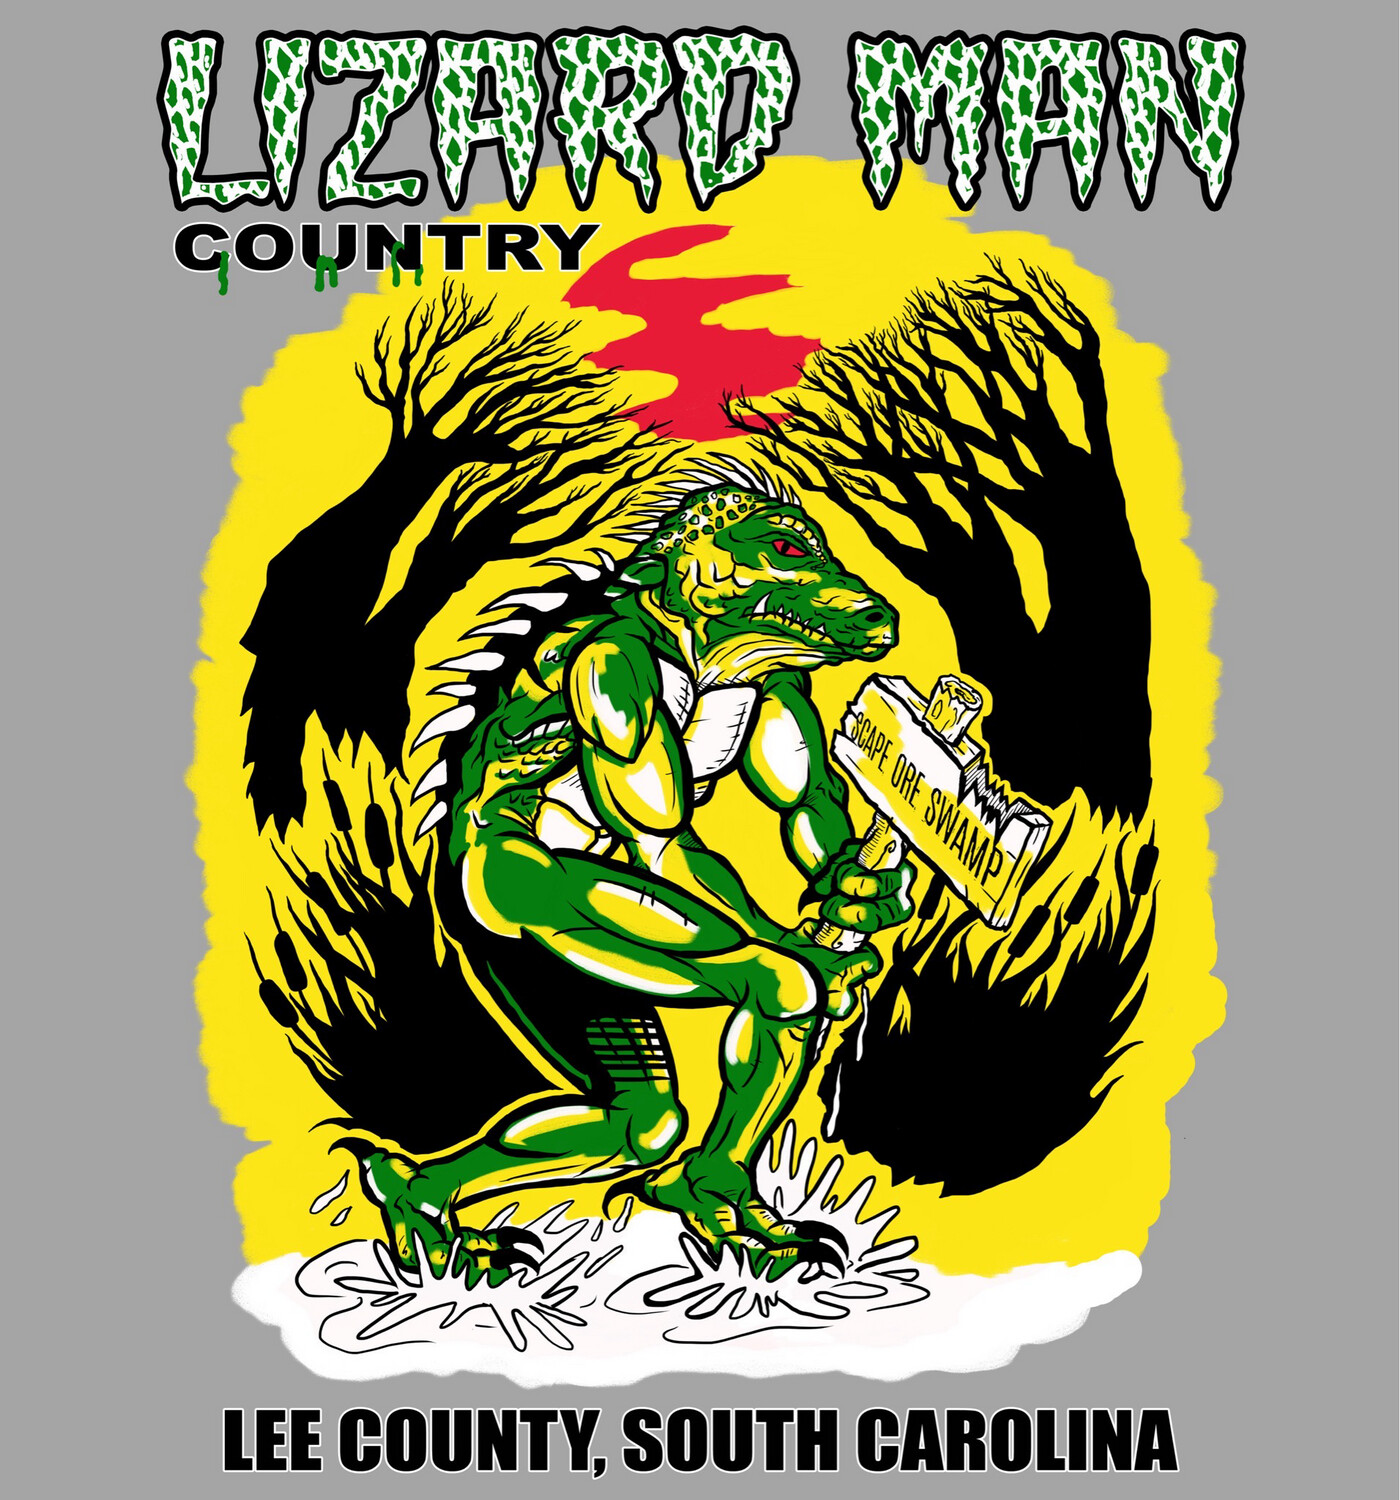 The Lizard Man of Scape Ore Swamp Tribute